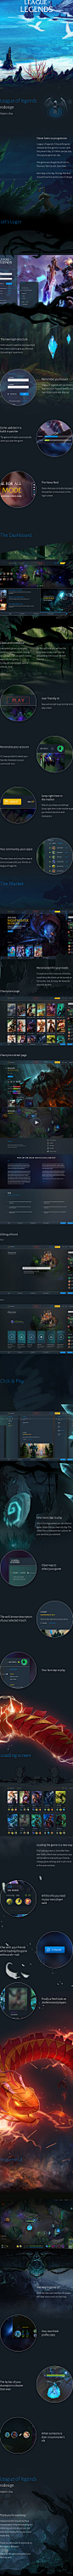 League Of Legends : We all saw the video of Riot games on Youtube about the upcomming visual update of summoner’s rift. I discovered that the UI of League Of Legends is outdated. It’s not relative anymore to the visual game it self.In this project I wante